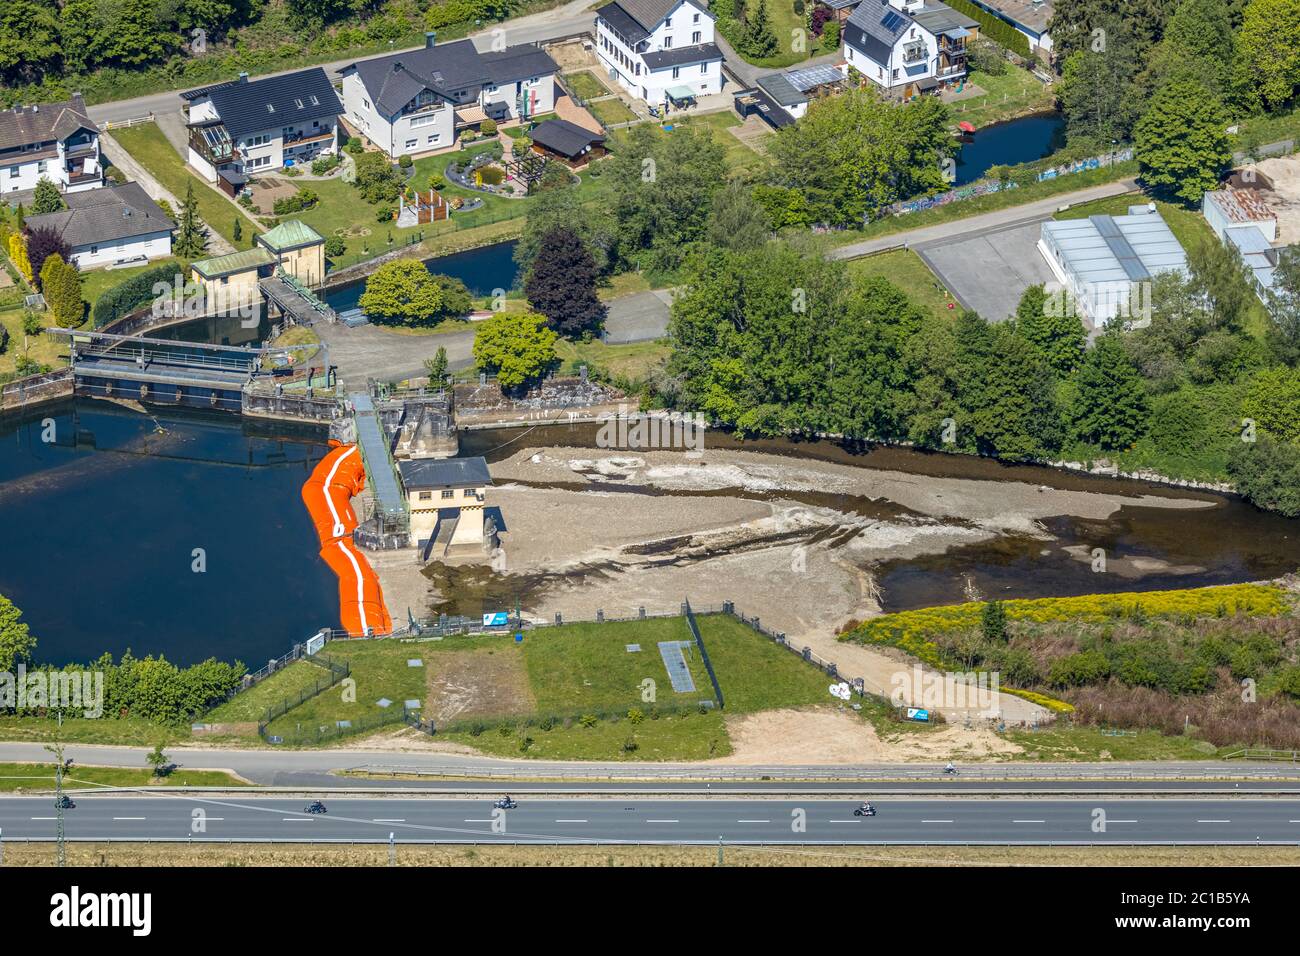 aerial view, barrier at the historic Lenneweir, hose system, river Lenne, Obergraben, Finnentrop, Sauerland, North Rhine-Westphalia, Germany, construc Stock Photo